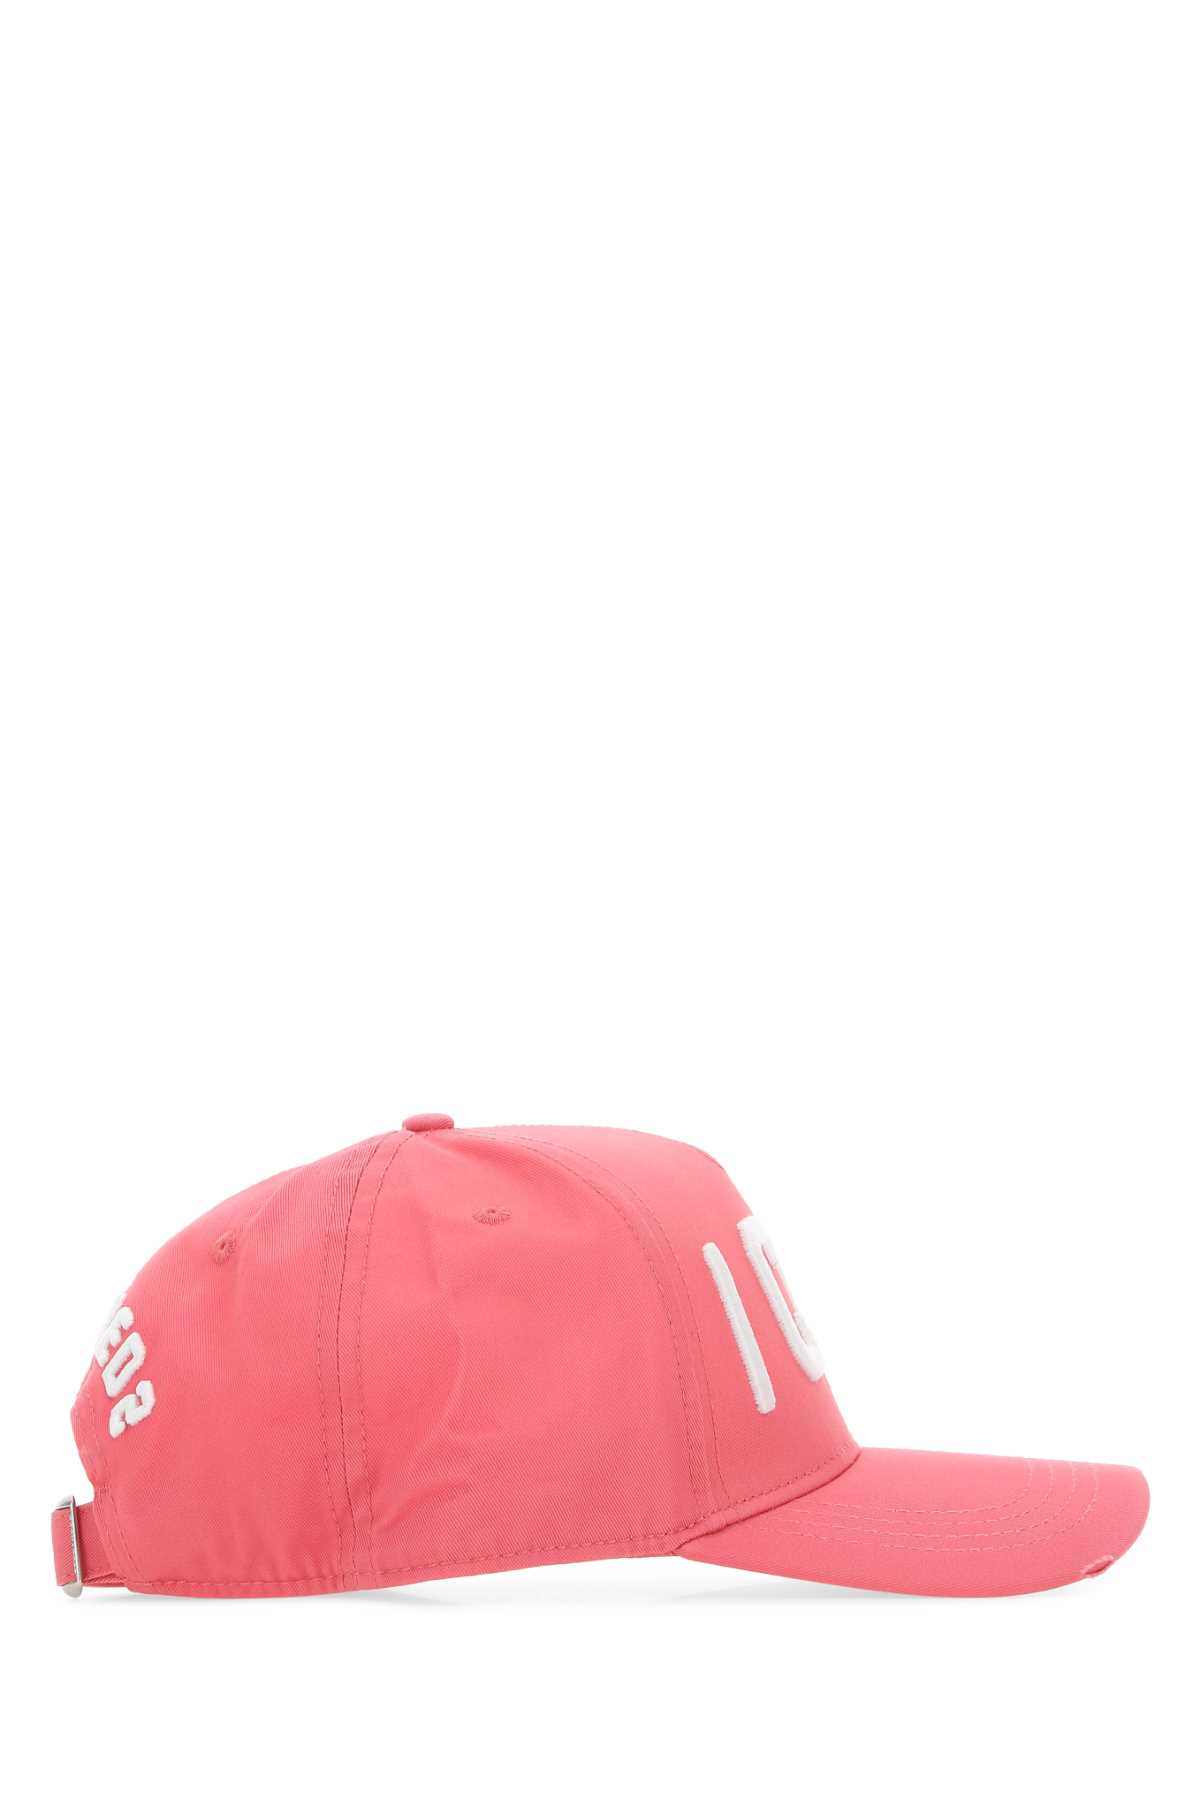 Shop Dsquared2 Pink Cotton Baseball Cap In M1972